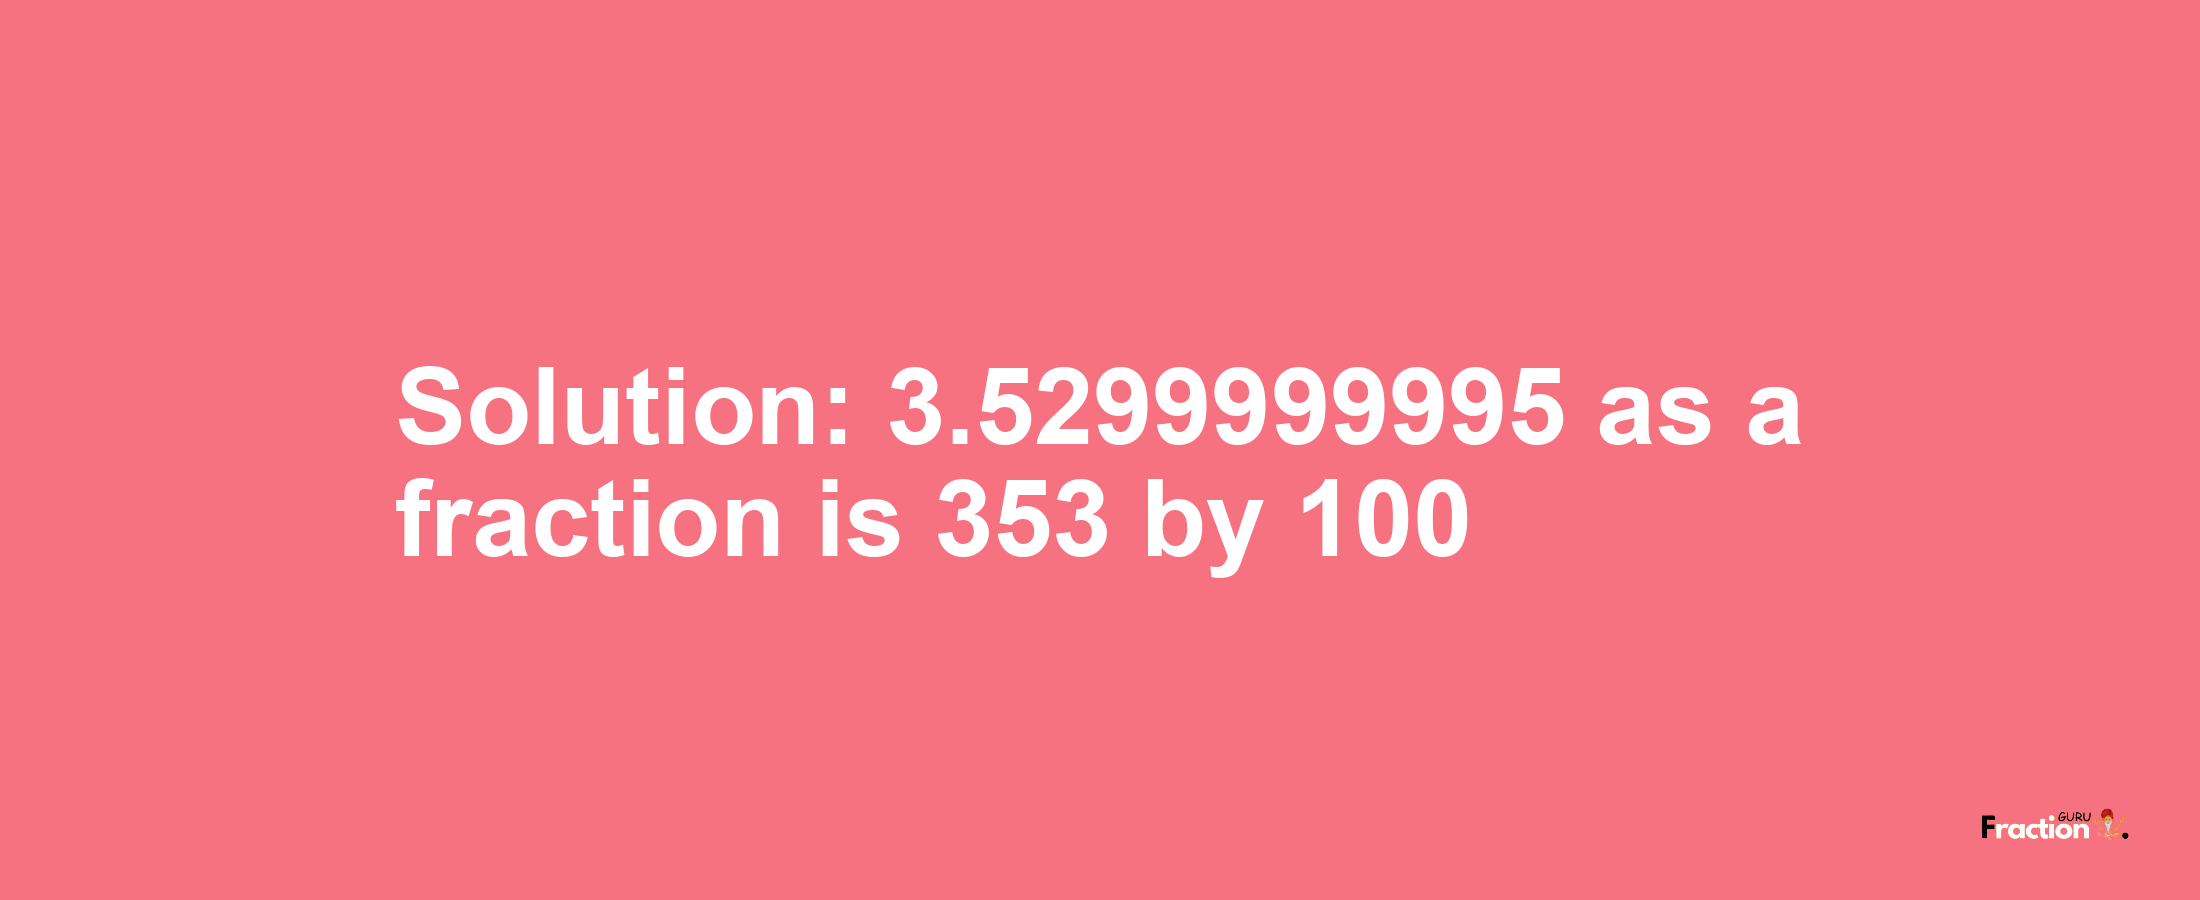 Solution:3.5299999995 as a fraction is 353/100